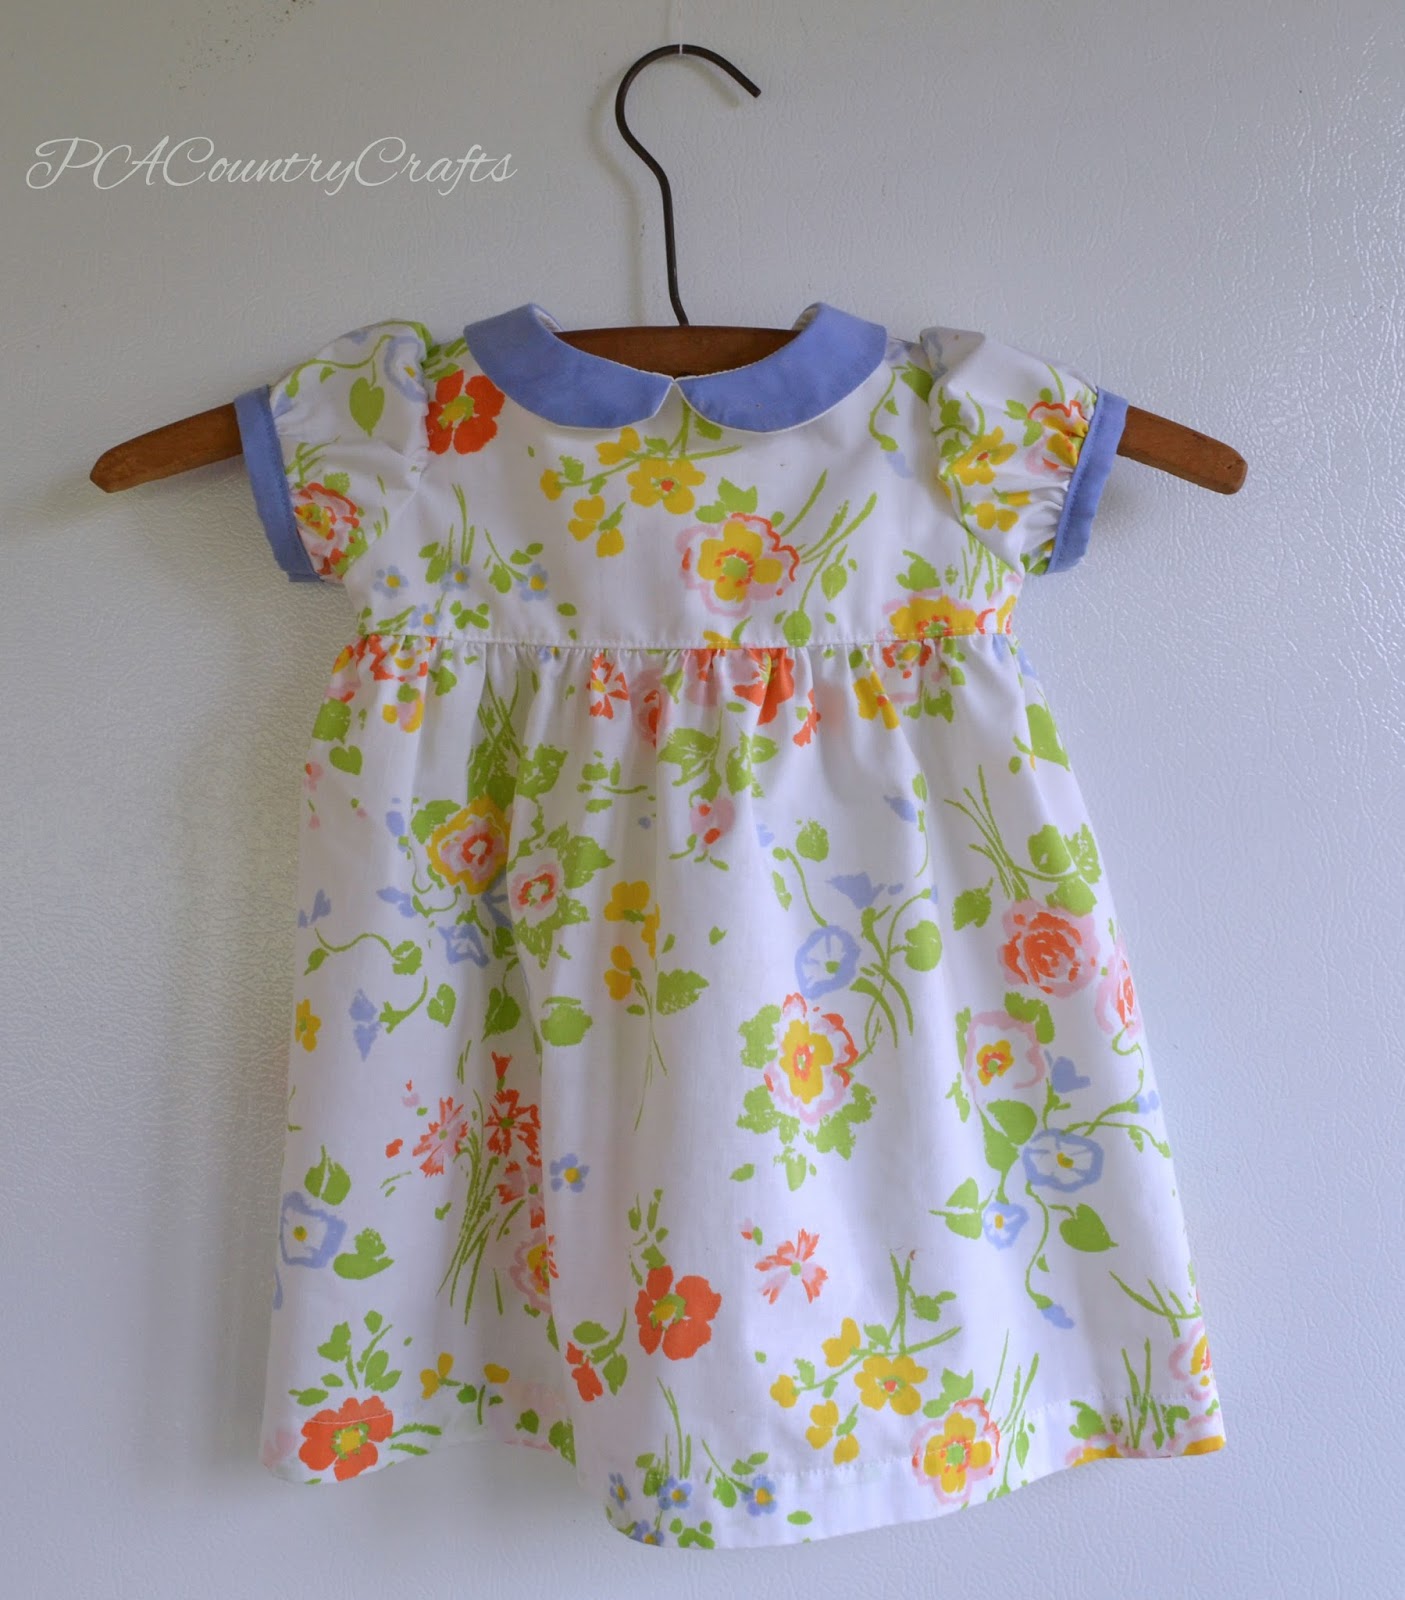 Vintage Baby Dress Collar Tutorial — PACountryCrafts